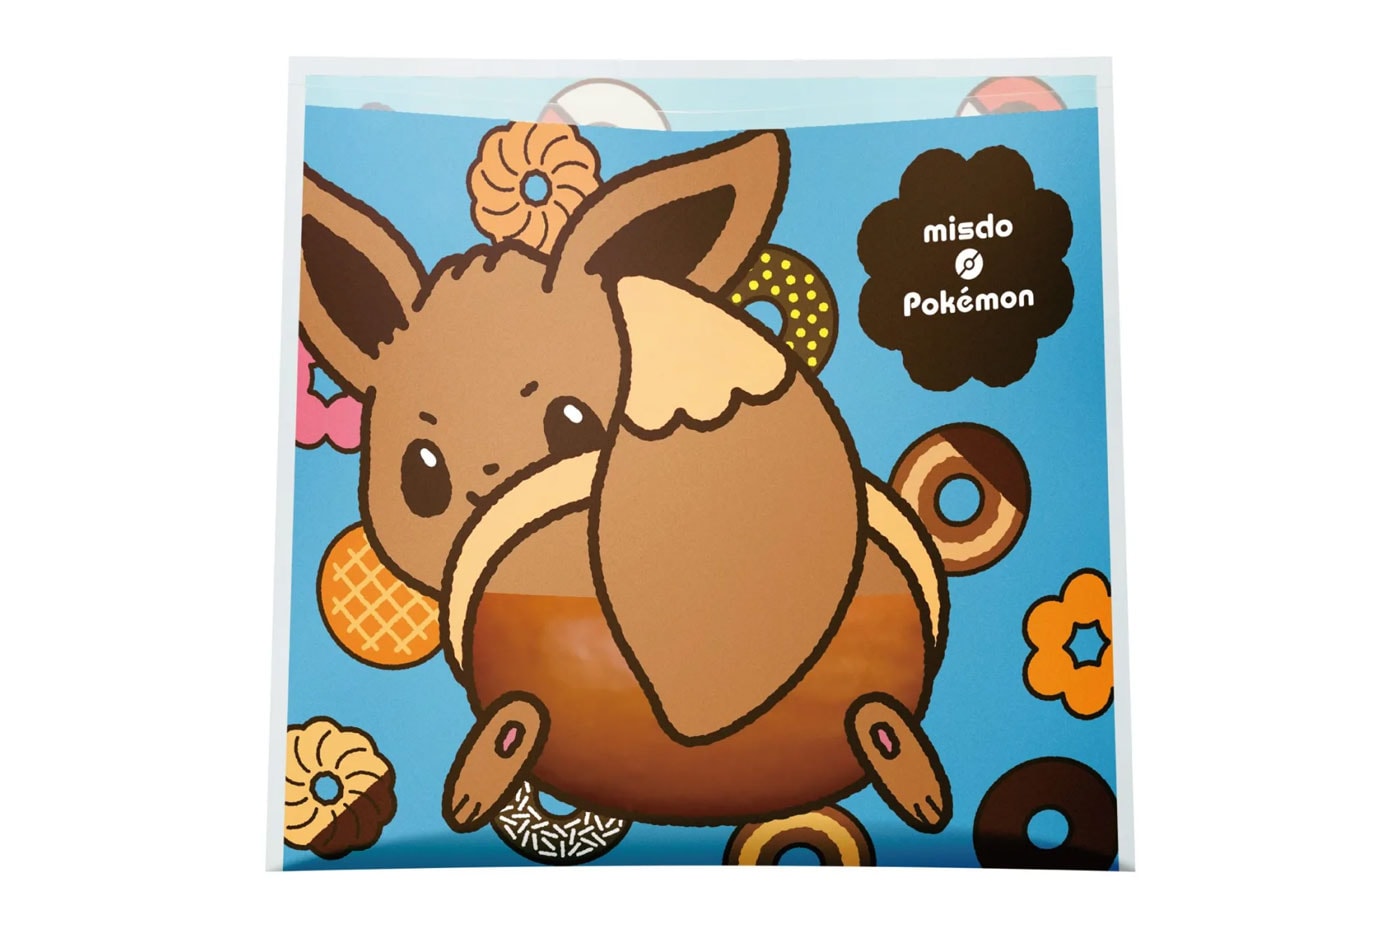 Japanese Mister Donut Chain Adds Pokémon Doughnuts to Their Repertoire eevee piplup pachirisu glaceon tokyo japan